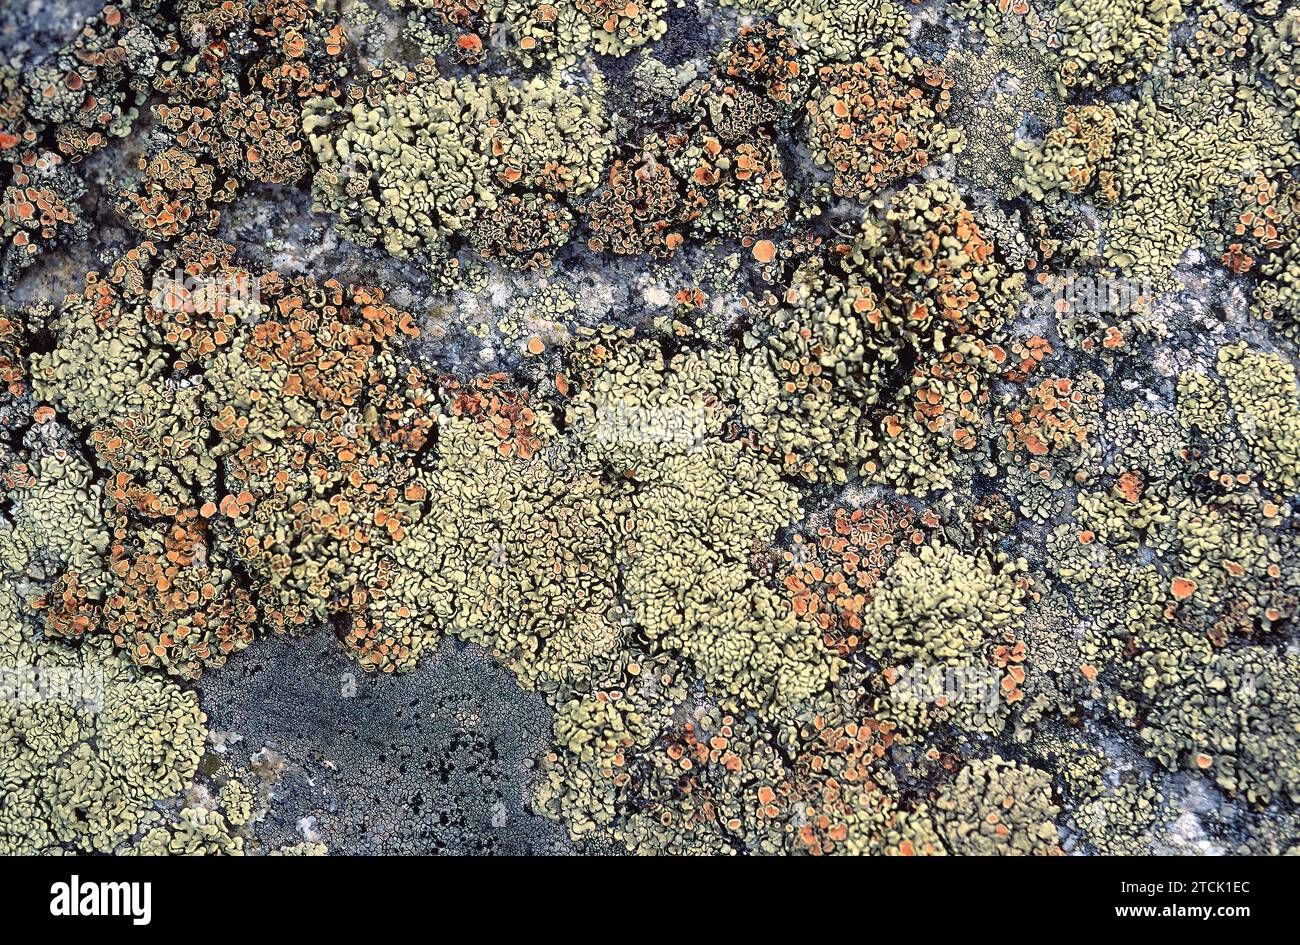 Lecanora rubina or Rhizoplaca chrysoleuca is a foliose lichen that grows on siliceous rocks. This photo was taken in La Cerdanya, Girona province, Cat Stock Photo